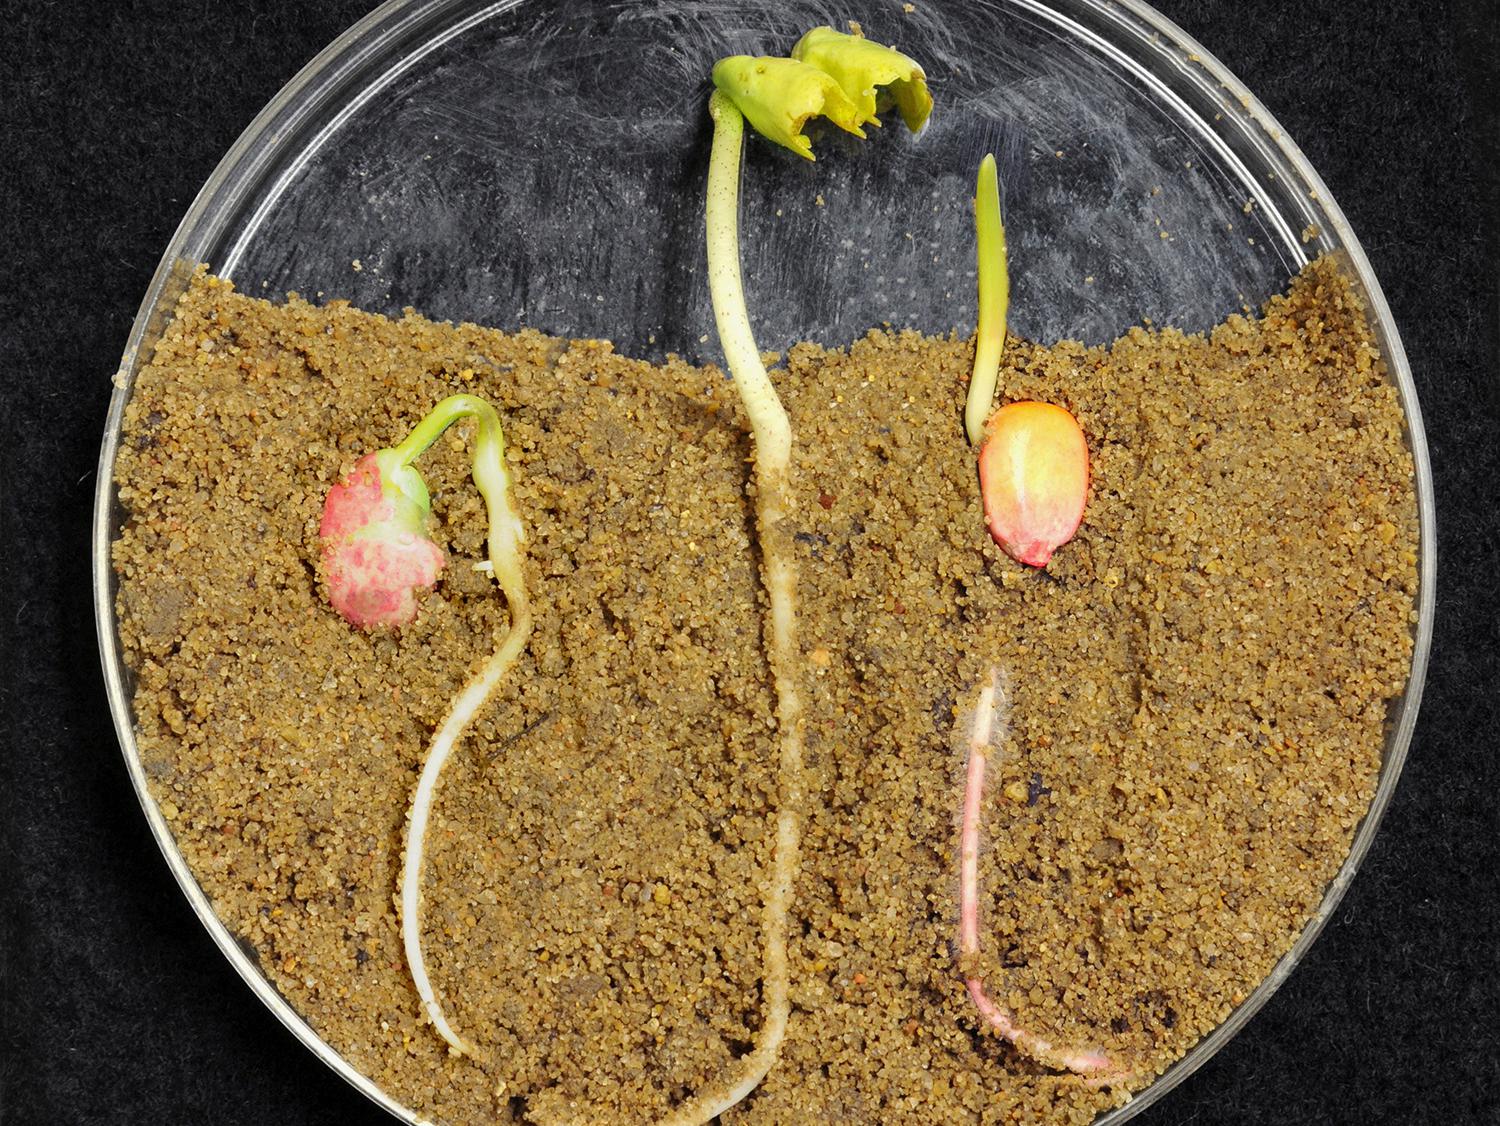 Mississippi farmers plan to plant more corn, less cotton and about the same soybean acreage as last year. From left, soybean, cotton and corn seeds have germinated in the lab. (Photo by MSU Ag Communications/Kat Lawrence)